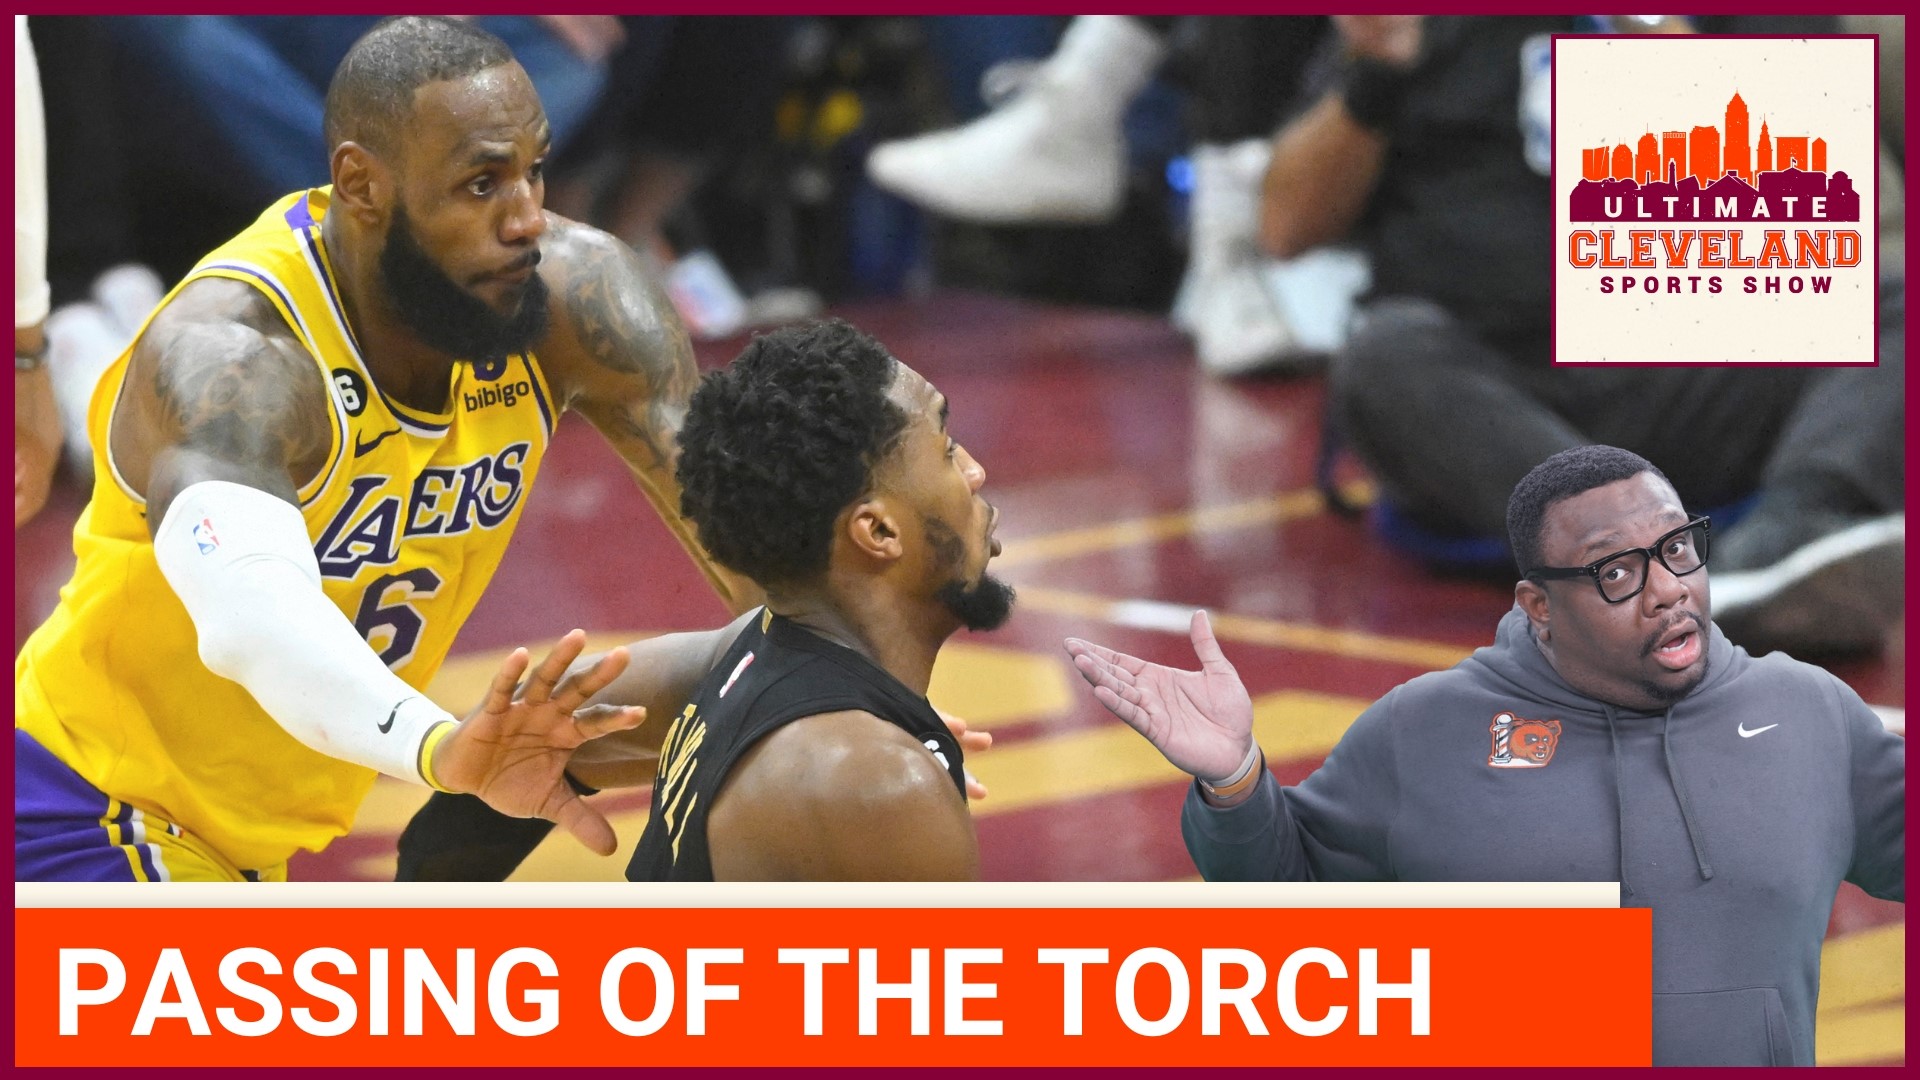 Mitchell drops 43 points in Cavs blowout over Lebron James and the Lakers. Is Mitchell a serious MVP candidate?